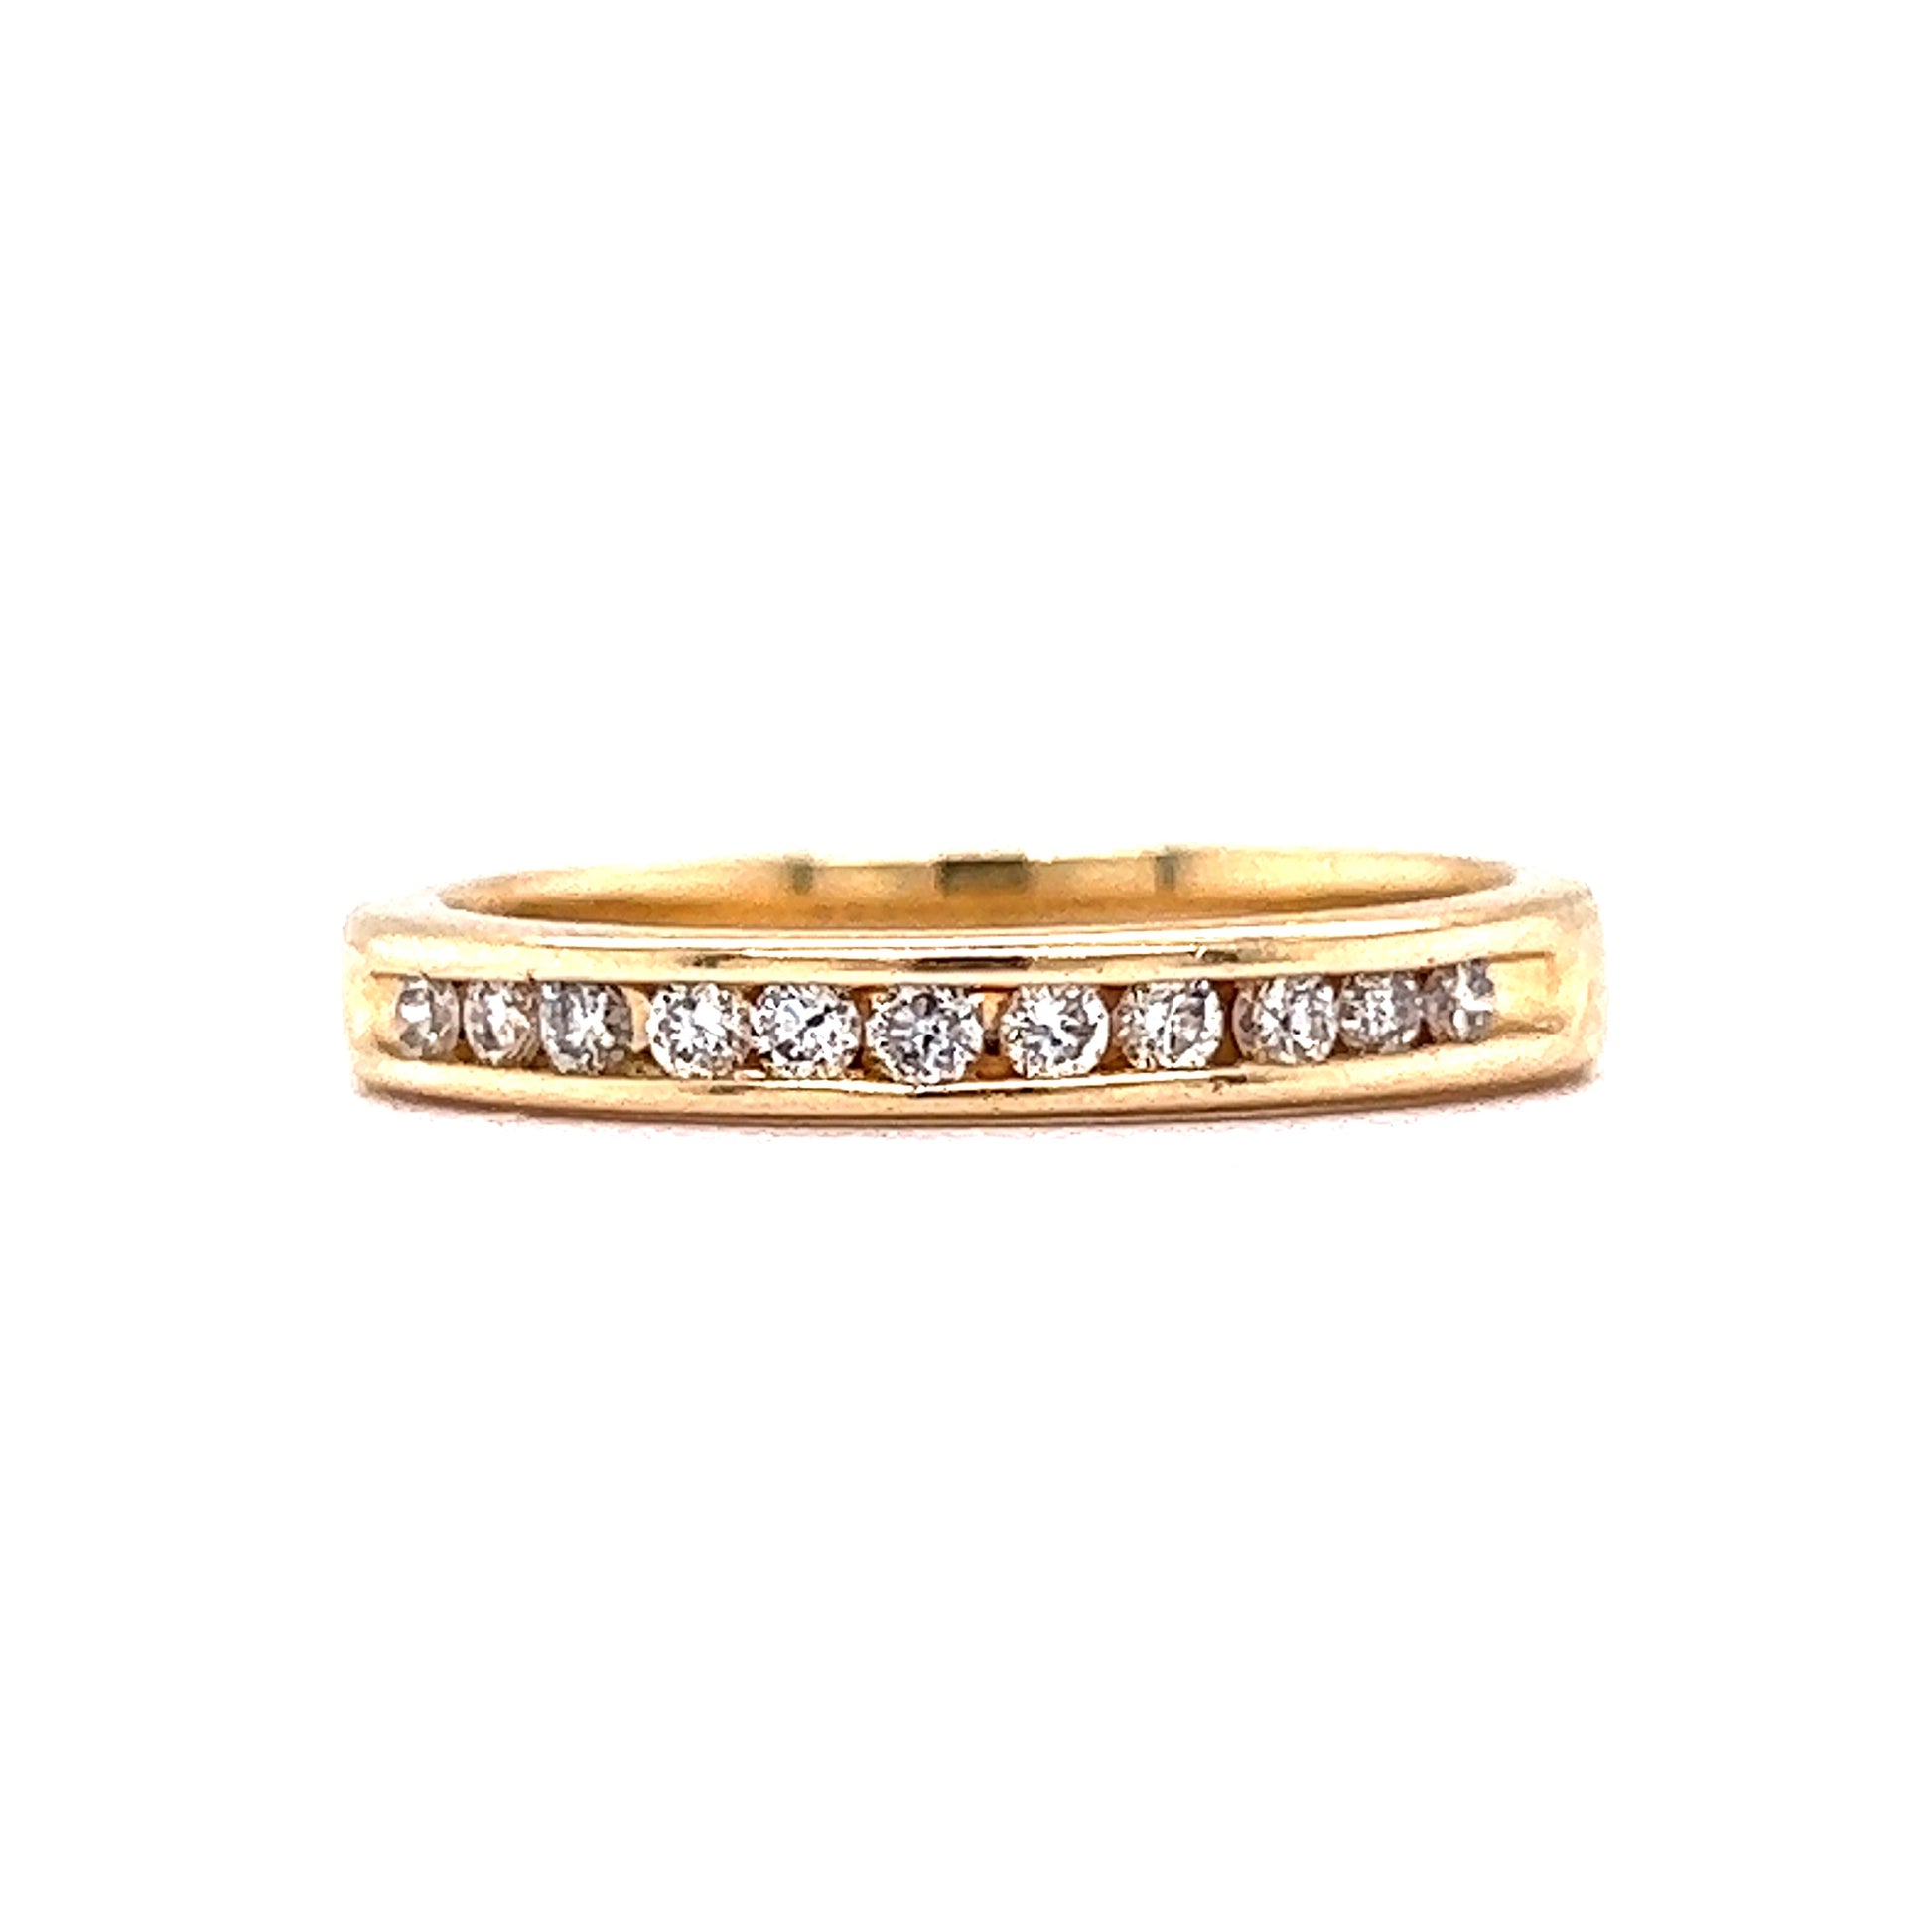 .22 Channel Set Diamond Wedding Band in 14k Yellow GoldComposition: 14 Karat Yellow Gold Ring Size: 7 Total Diamond Weight: .22ct Total Gram Weight: 2.9 g Inscription: 14k
      